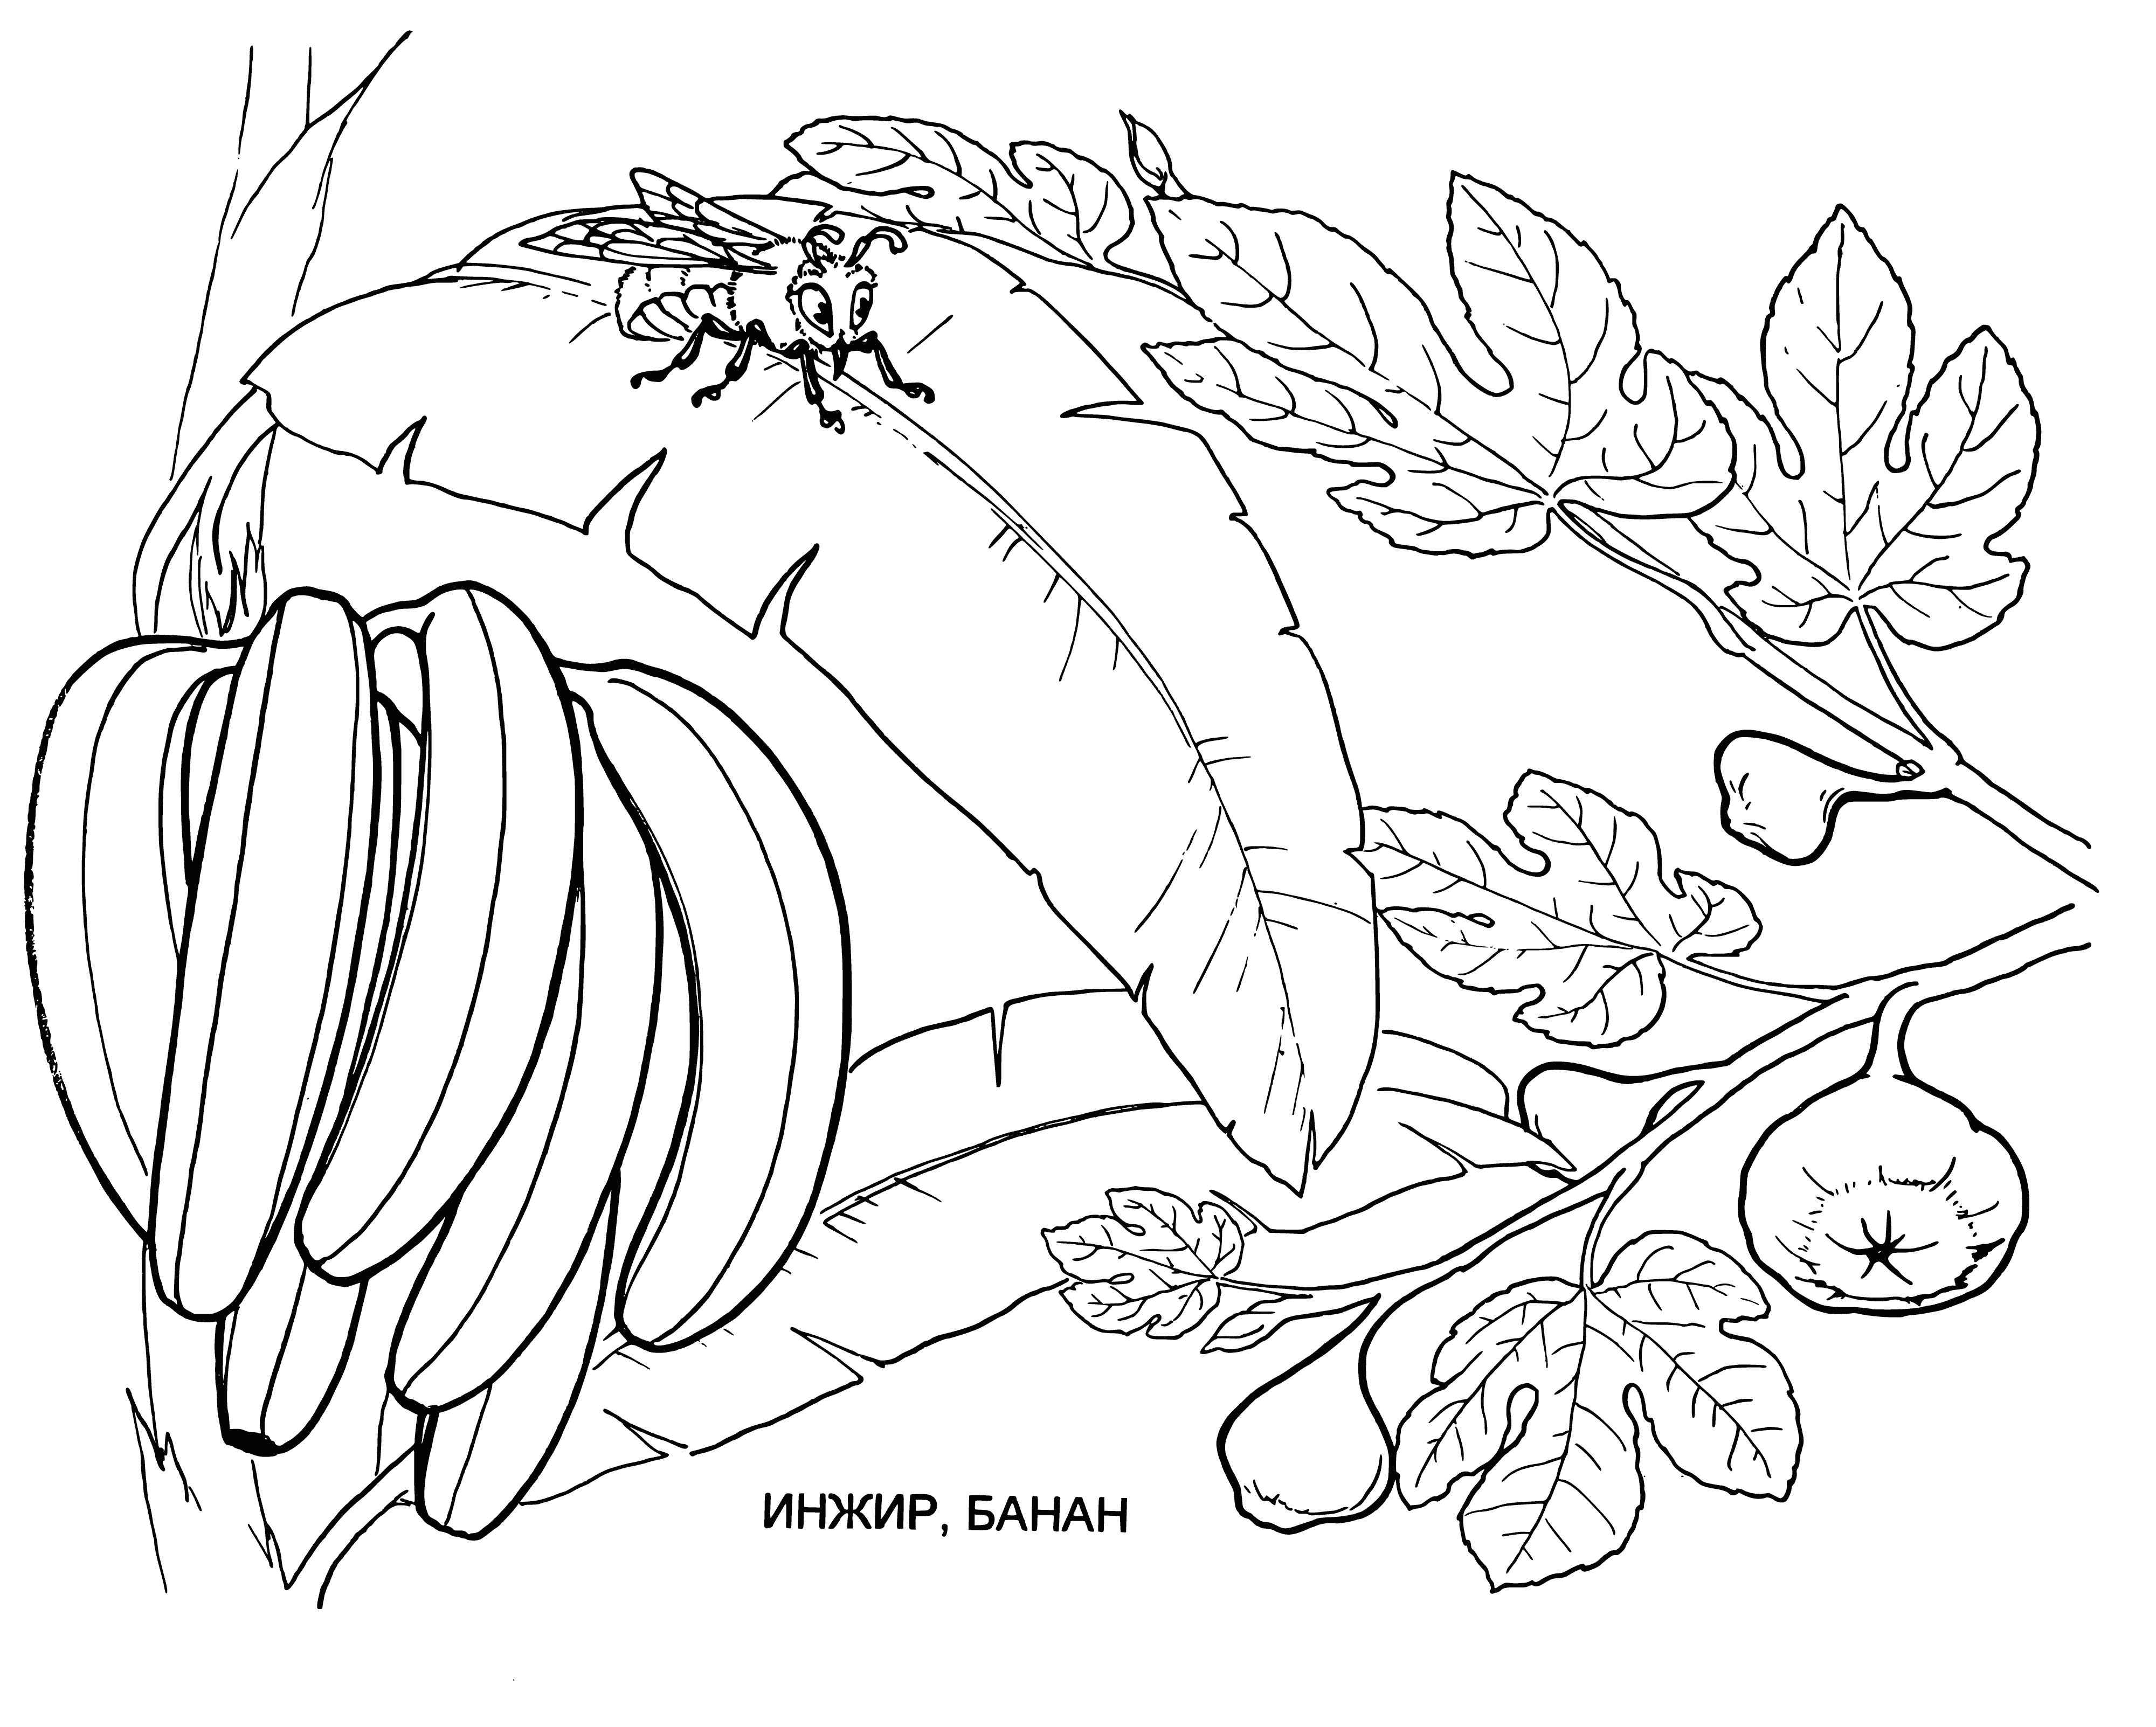 coloring page: Two fruits, figs(purple) and bananas(yellow), with seeds. Figs bigger than bananas. #coloringpage